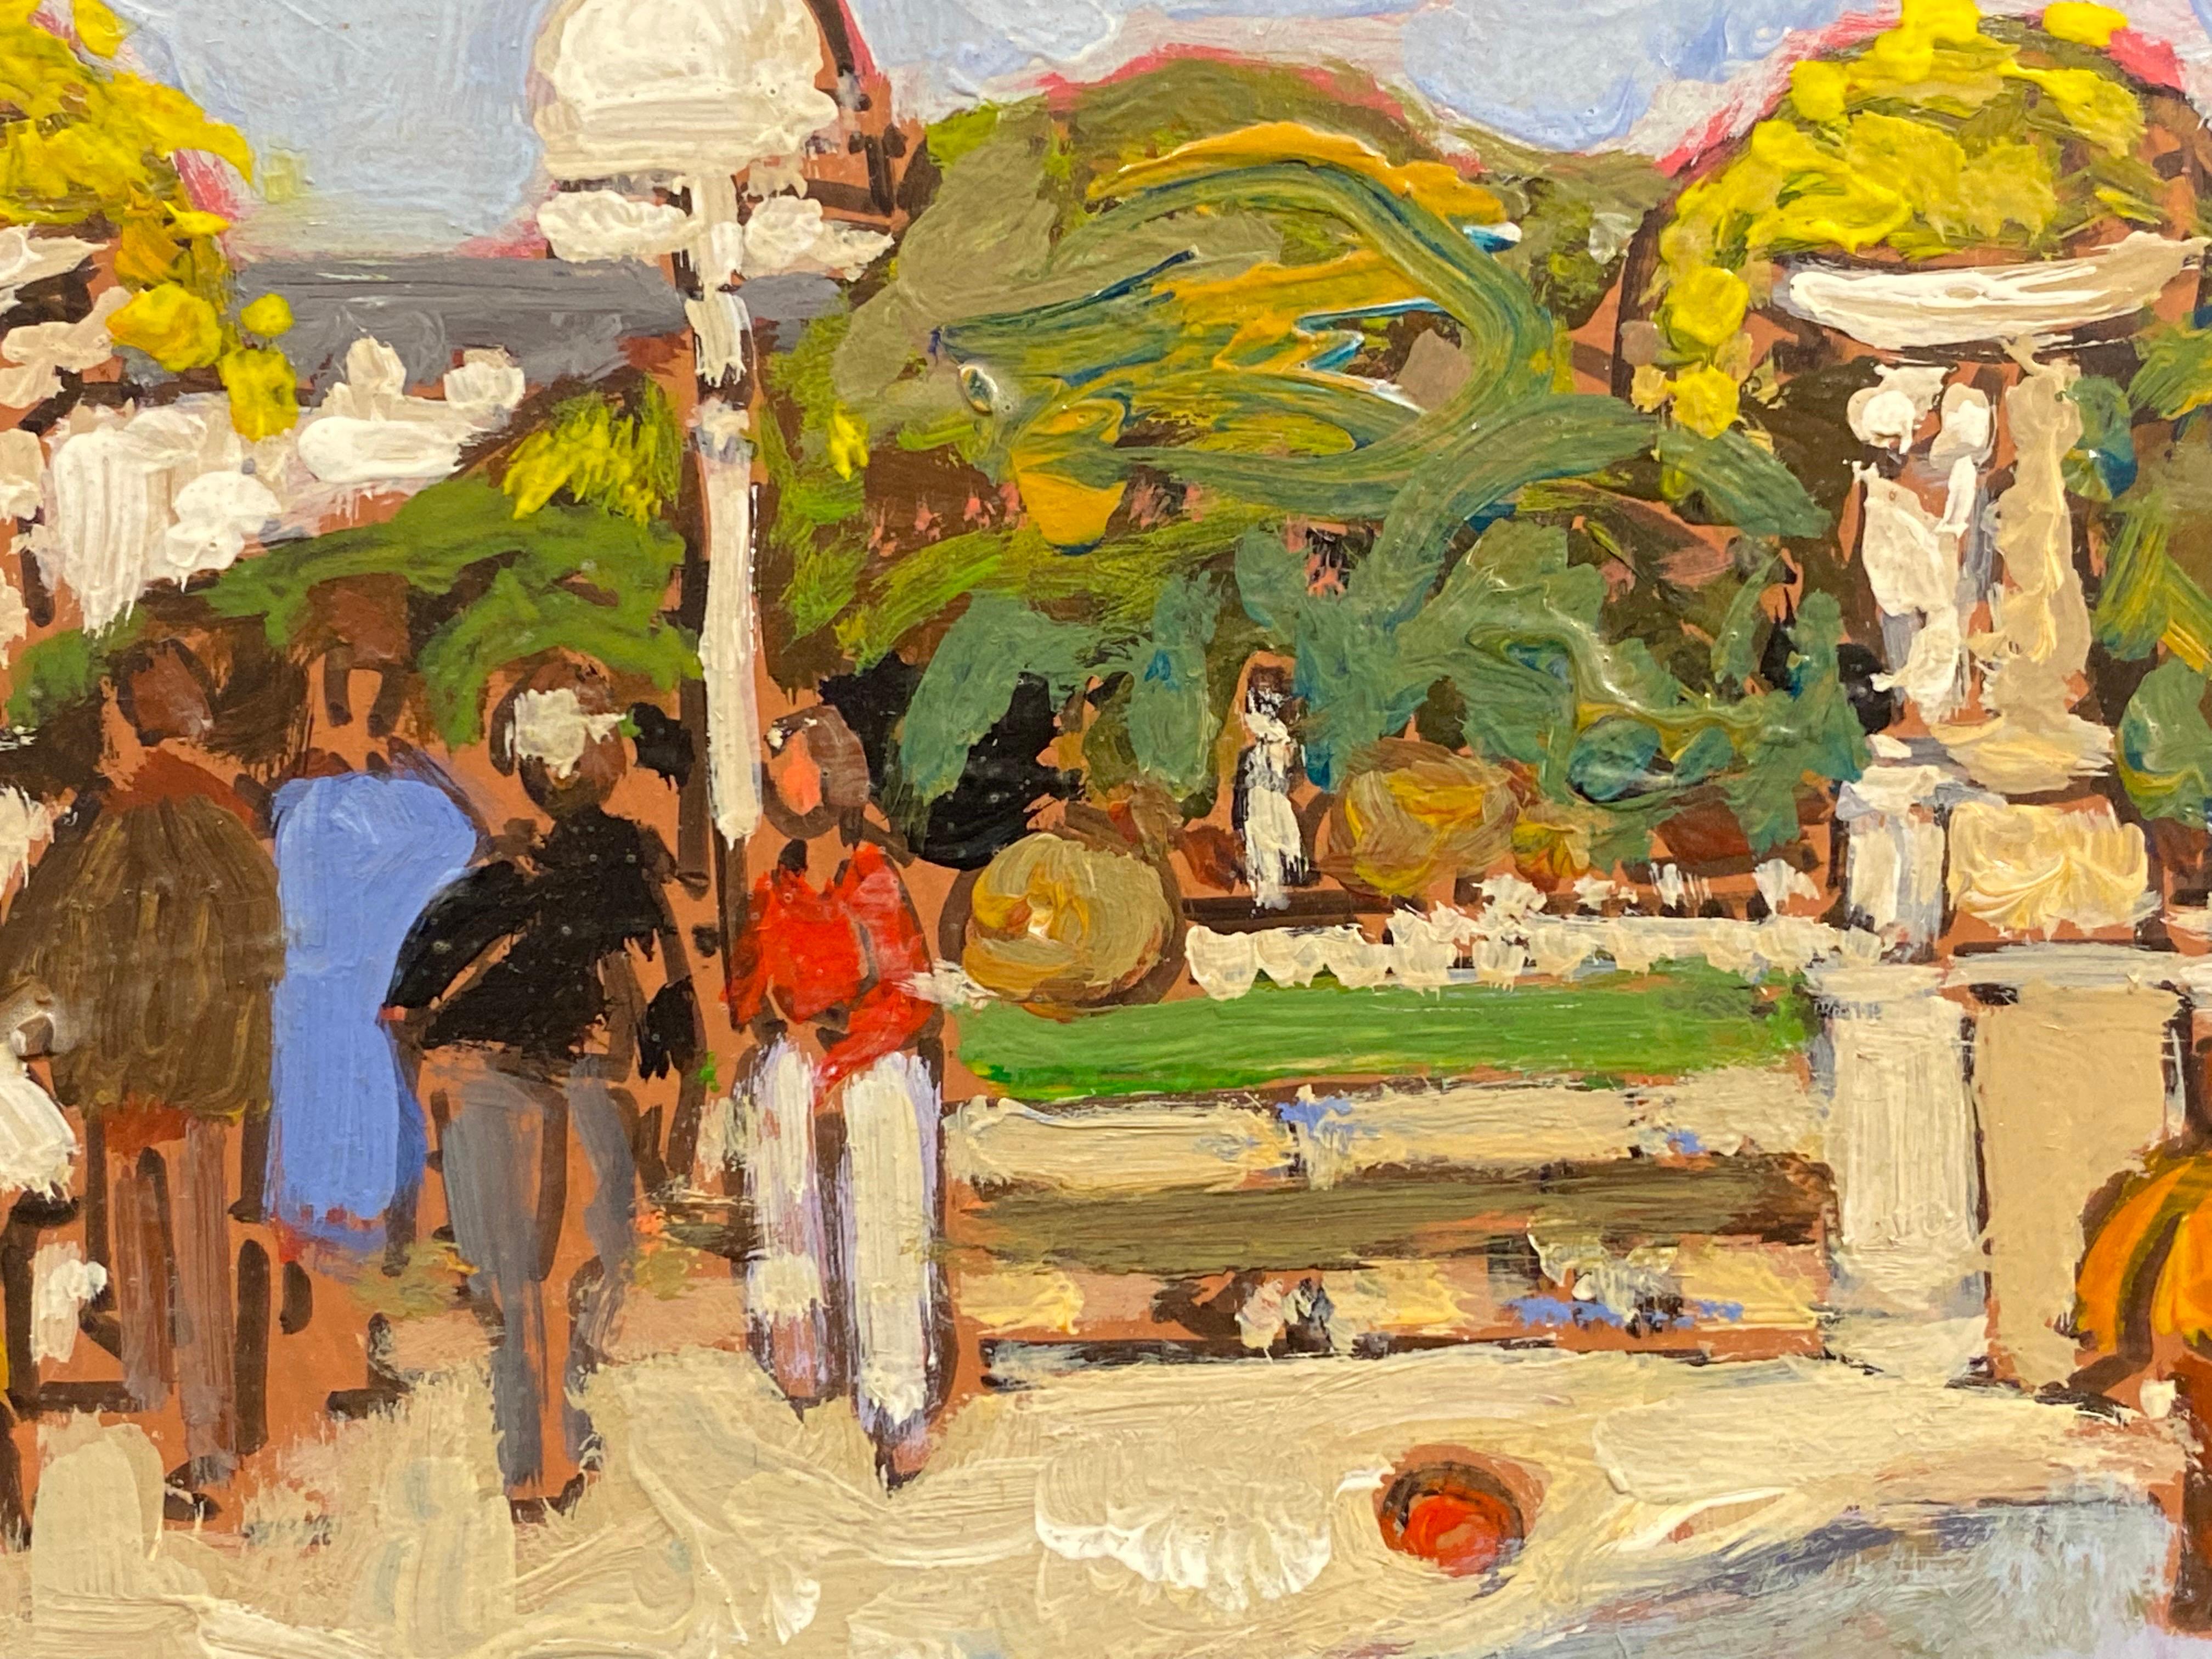 Luxembourg Gardens Paris, Signed Impressionist French Oil Painting with figures - Beige Landscape Painting by Patrice Poindrelle